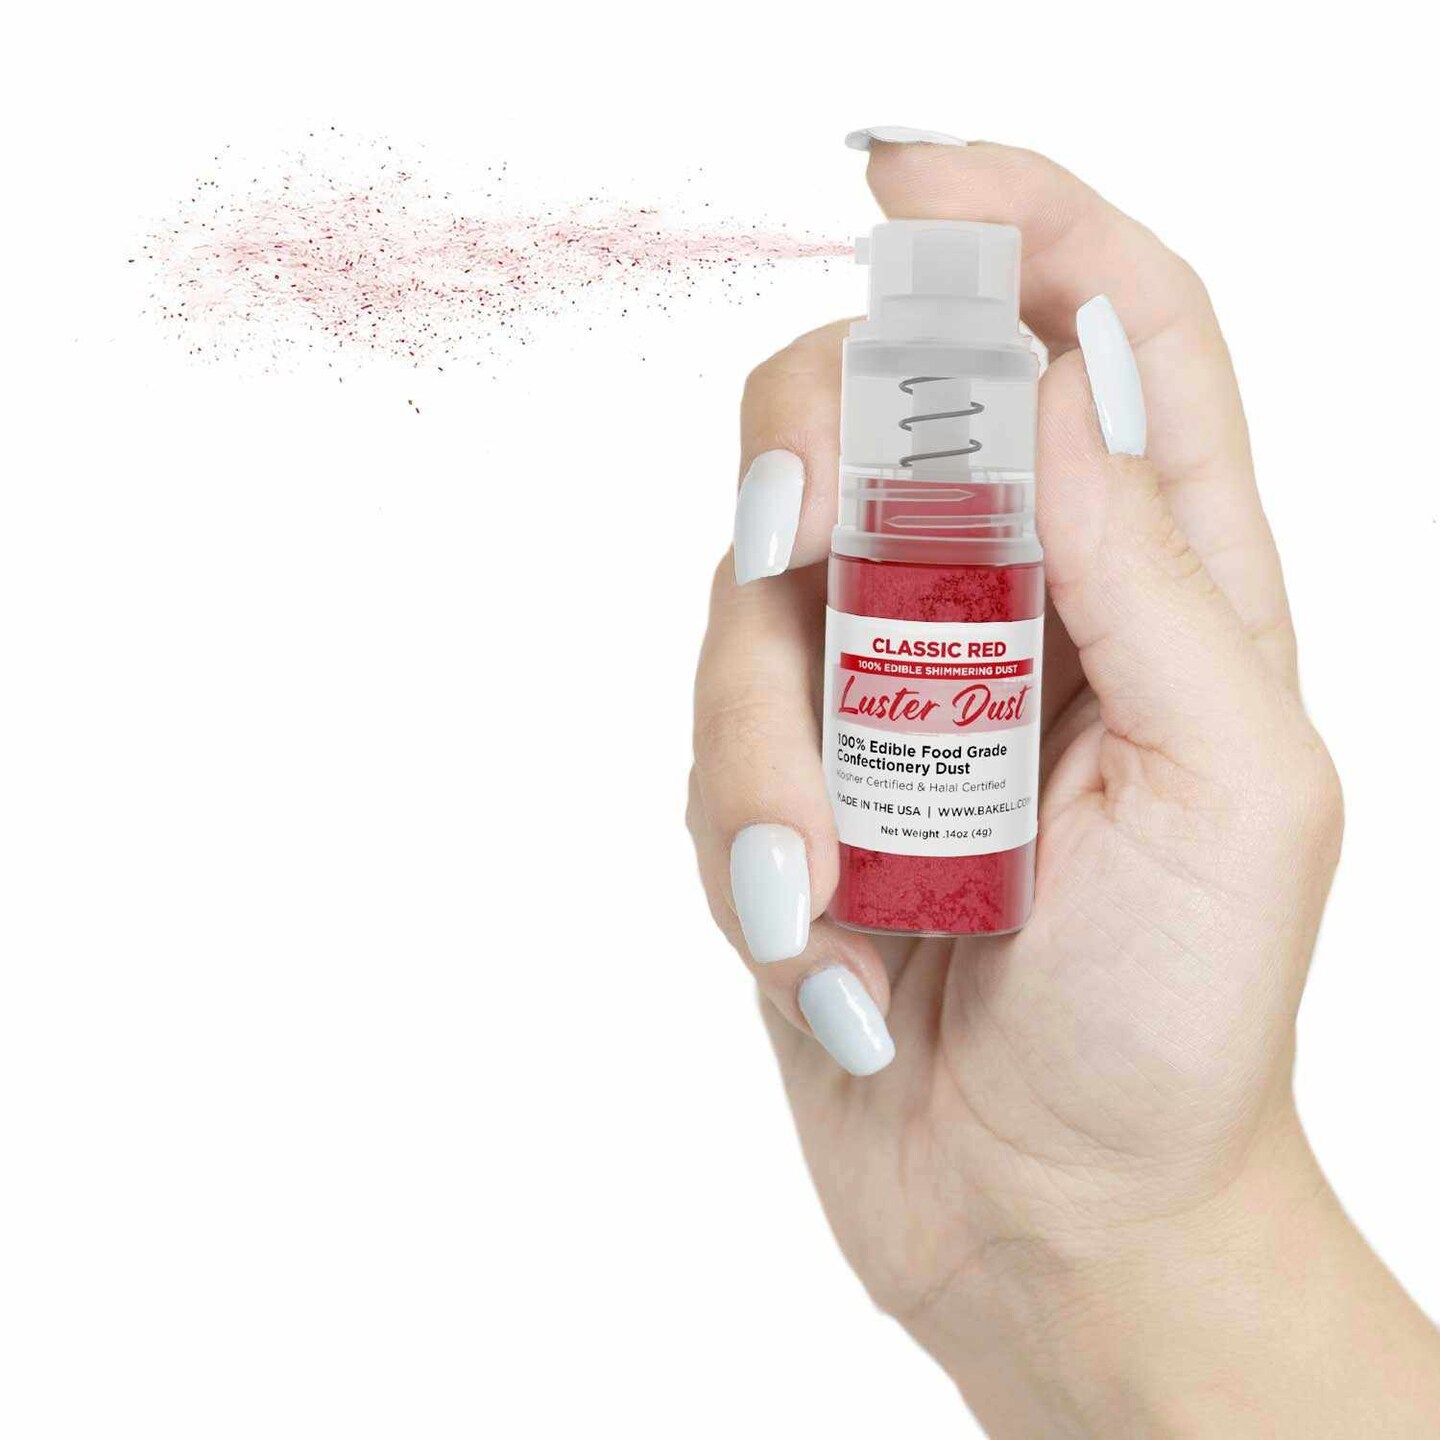 Classic Red Luster Dust Spray | Luster Dust Edible Glitter Spray Dust for Cakes, Cookies, Desserts, Paint. FDA Compliant (4 Gram Pump)